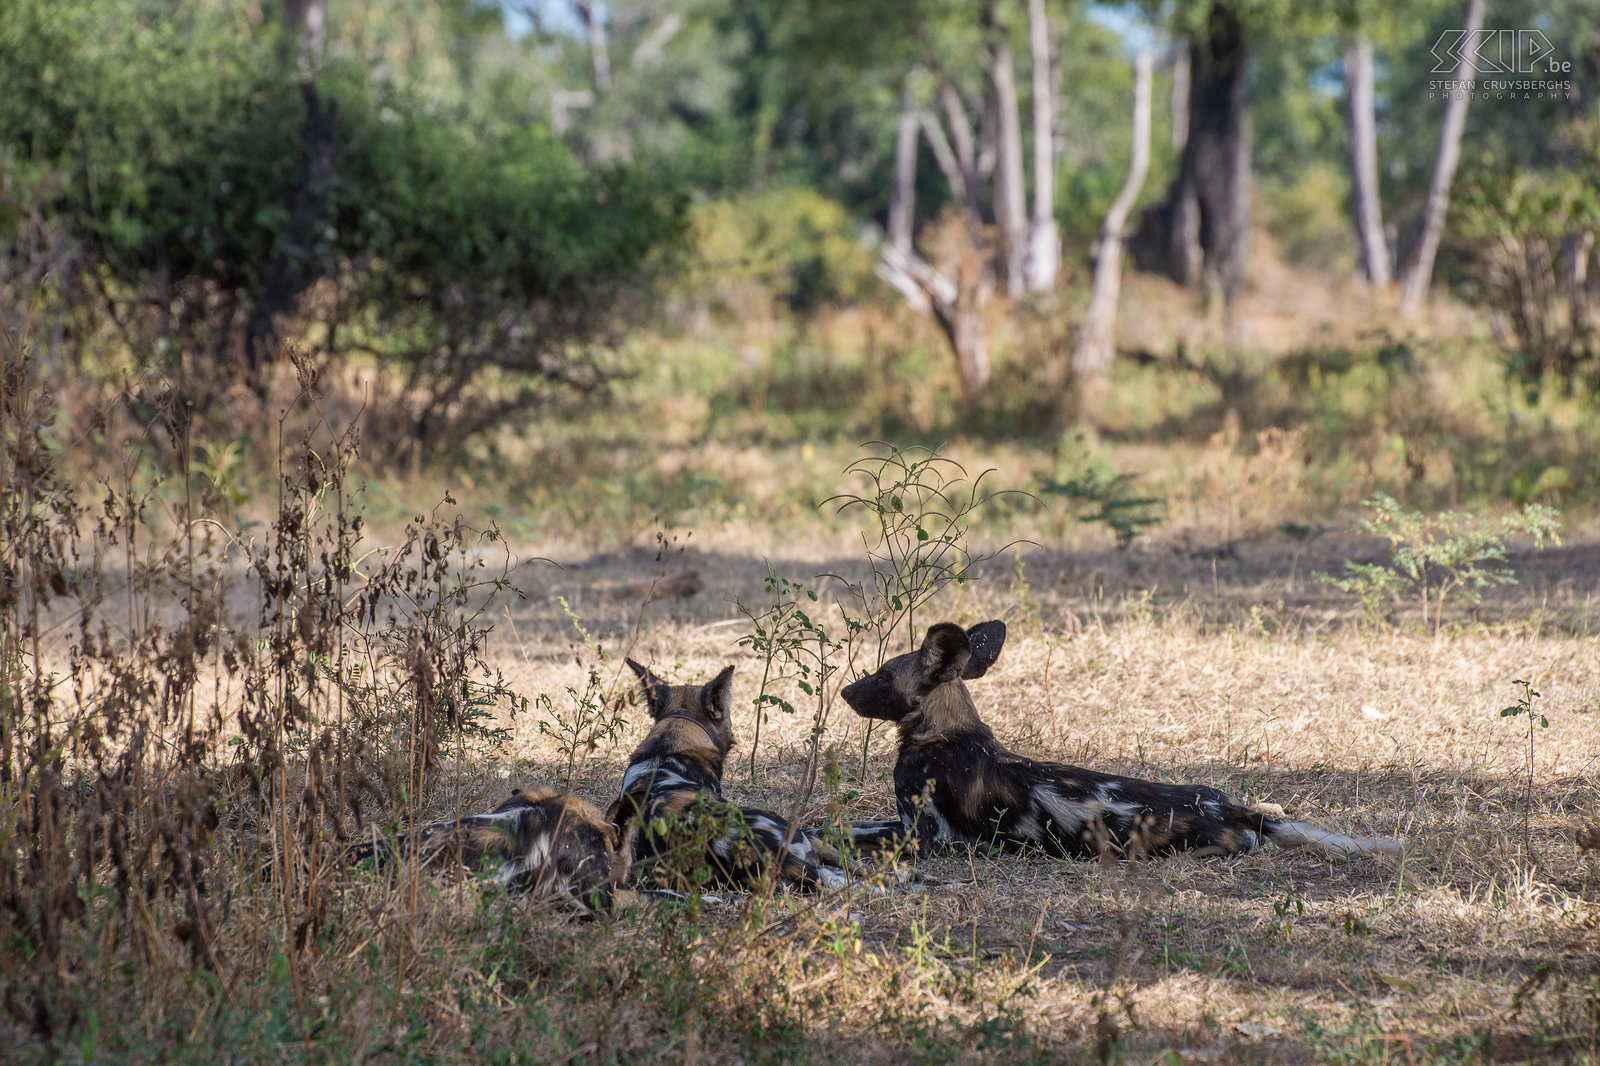 South Luangwa - Wild dogs During our 5 days of safari in South Luangwa we also encountered a pack of African wild dogs (African Painted dog, Lycaon pictus) several times. It is an endangered species that can travel huge distances. They have very strong social bonds and are specialised pack hunters of common medium-sized antelopes. Stefan Cruysberghs